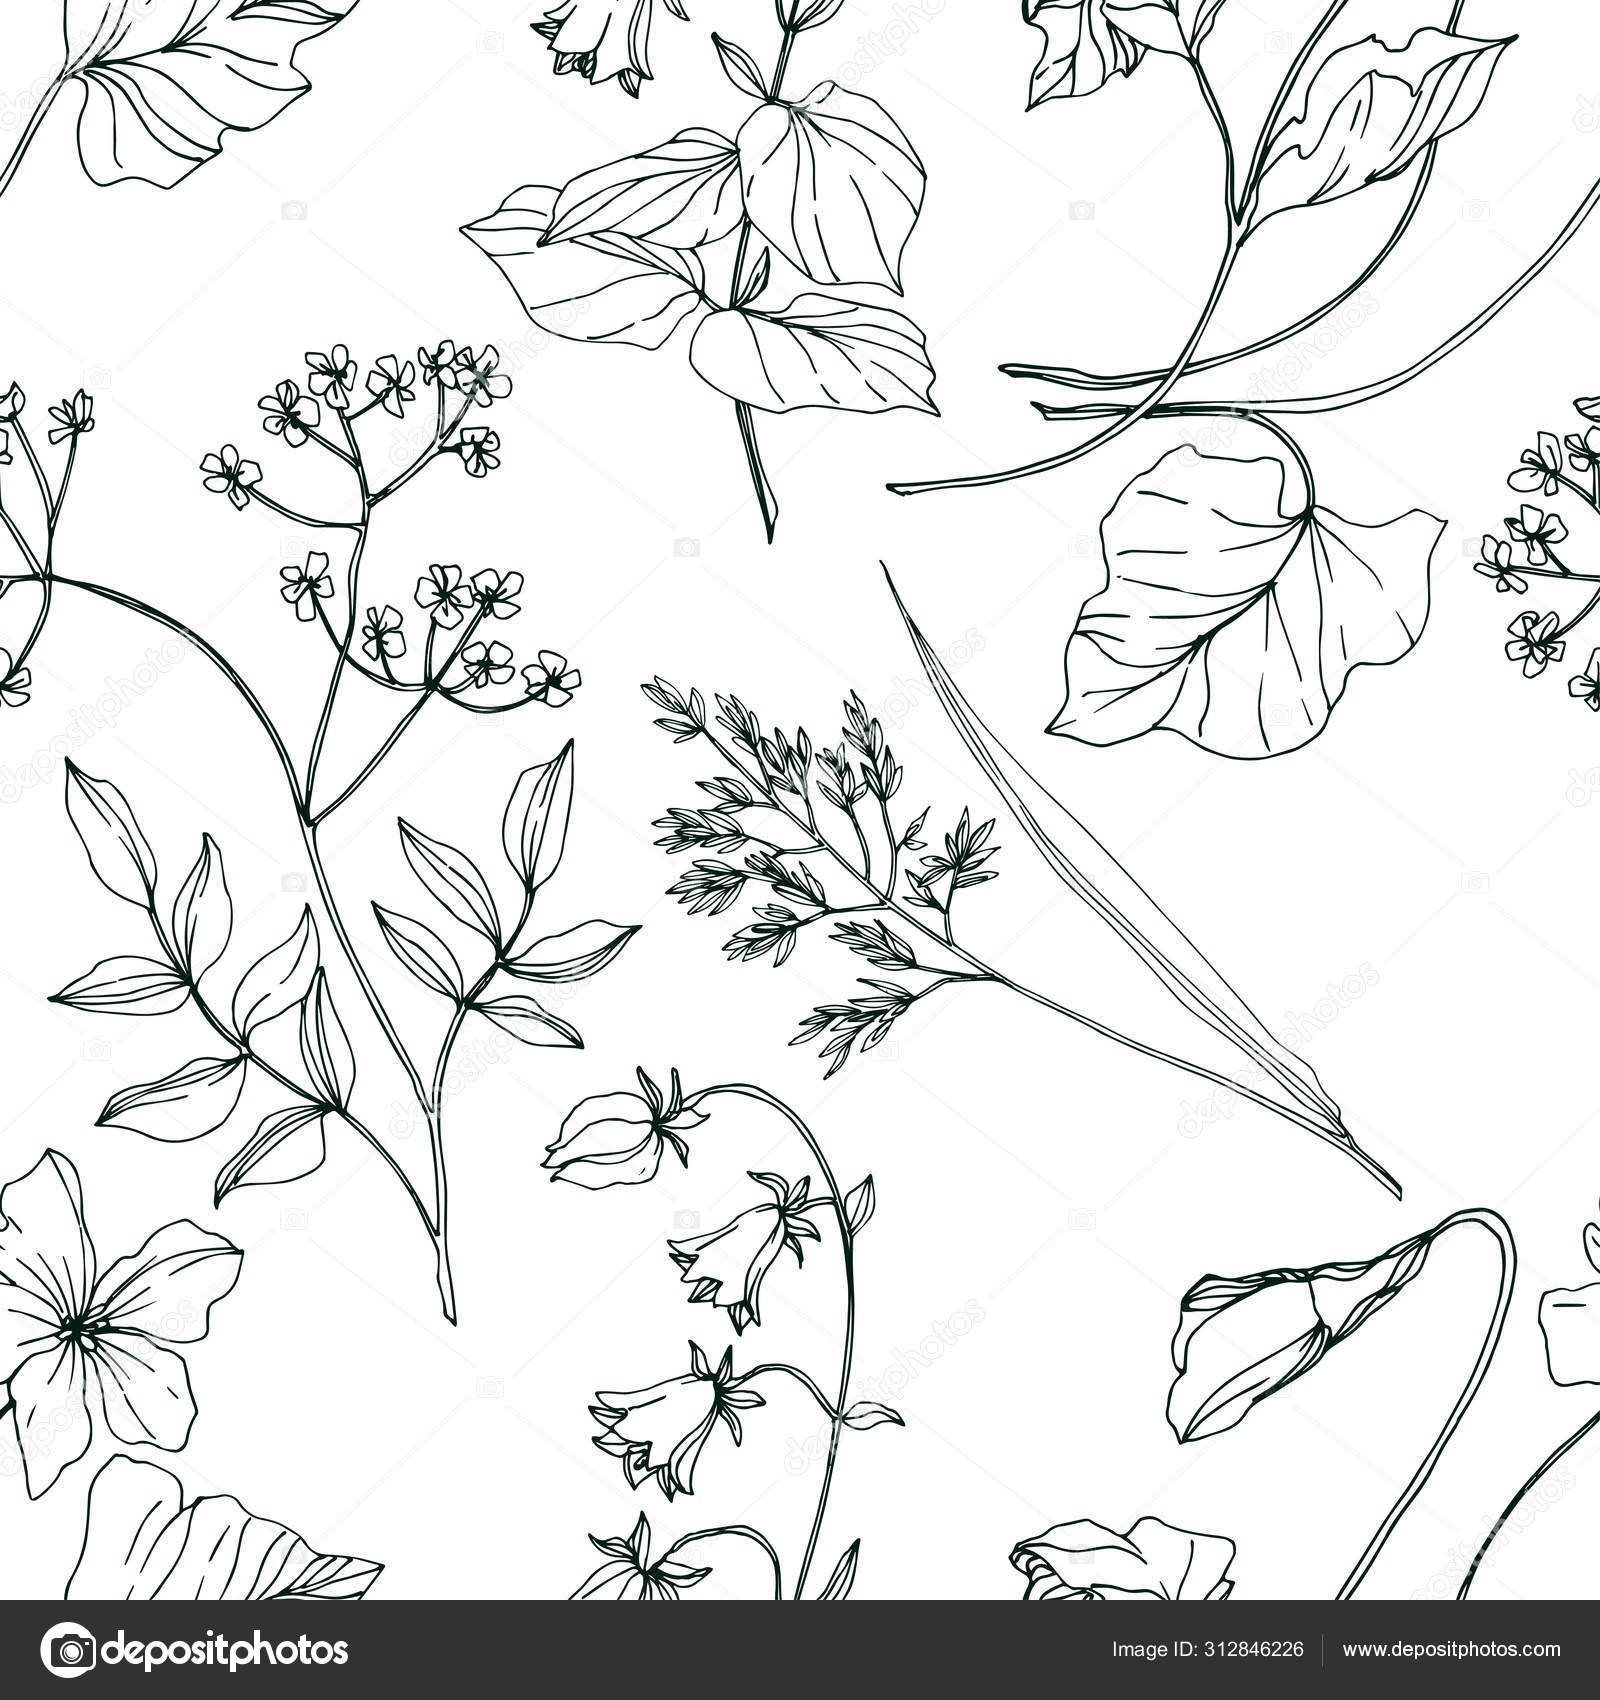 Vector Wildflowers Floral Botanical Flowers Black And White Engraved Ink Art Seamless Background Pattern Vector Image By C Andreyanush Vector Stock